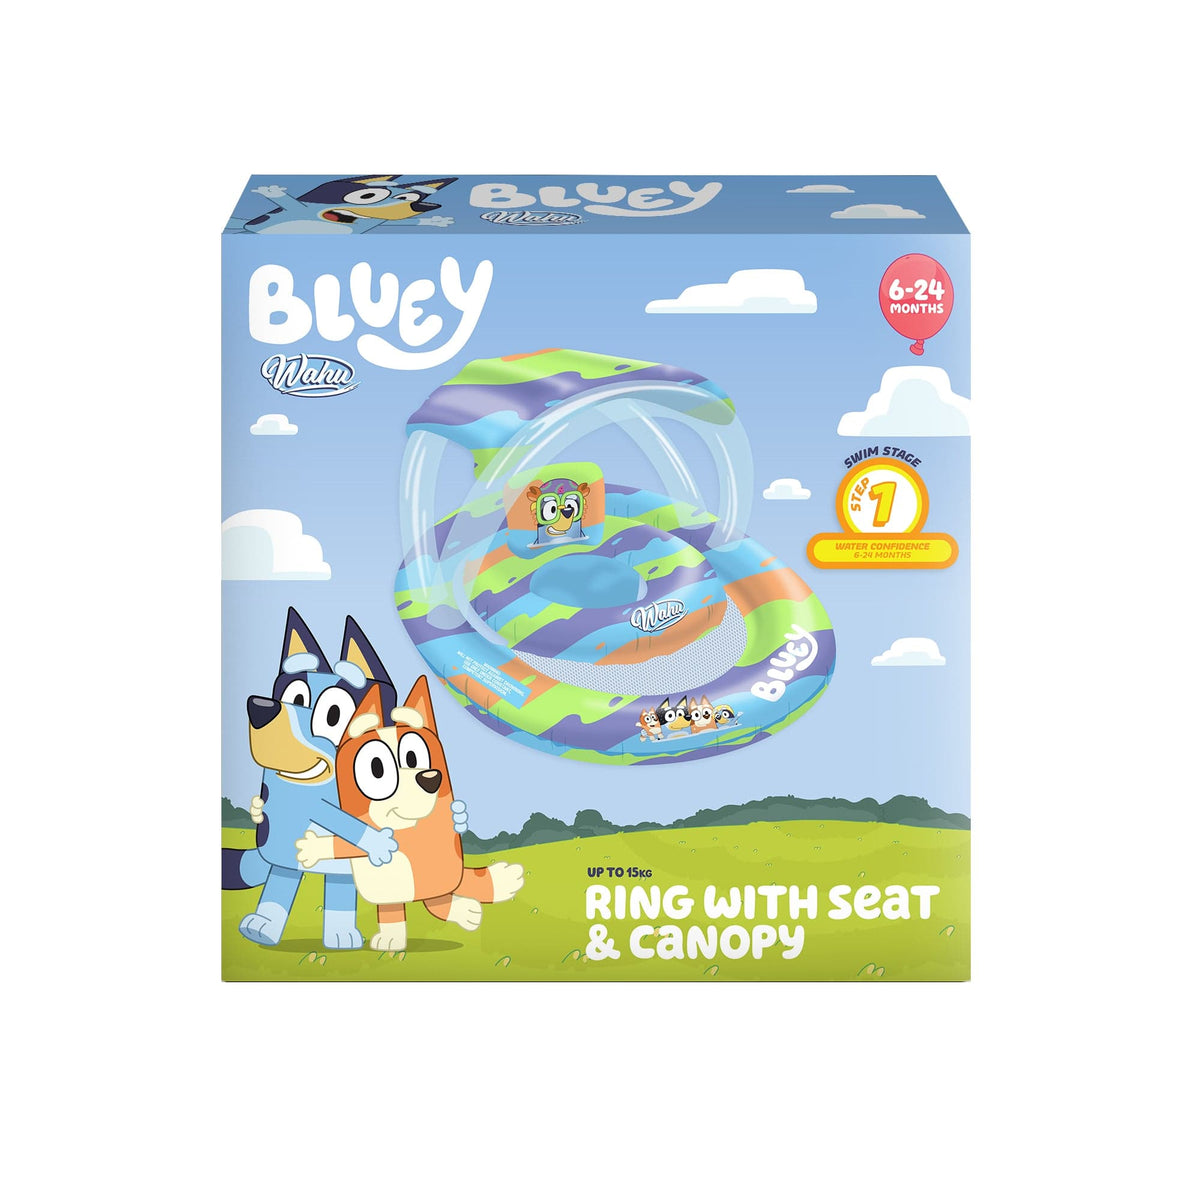 Wahu x Bluey Ring w/Seat &amp; Canopy 6-24 months-15kg